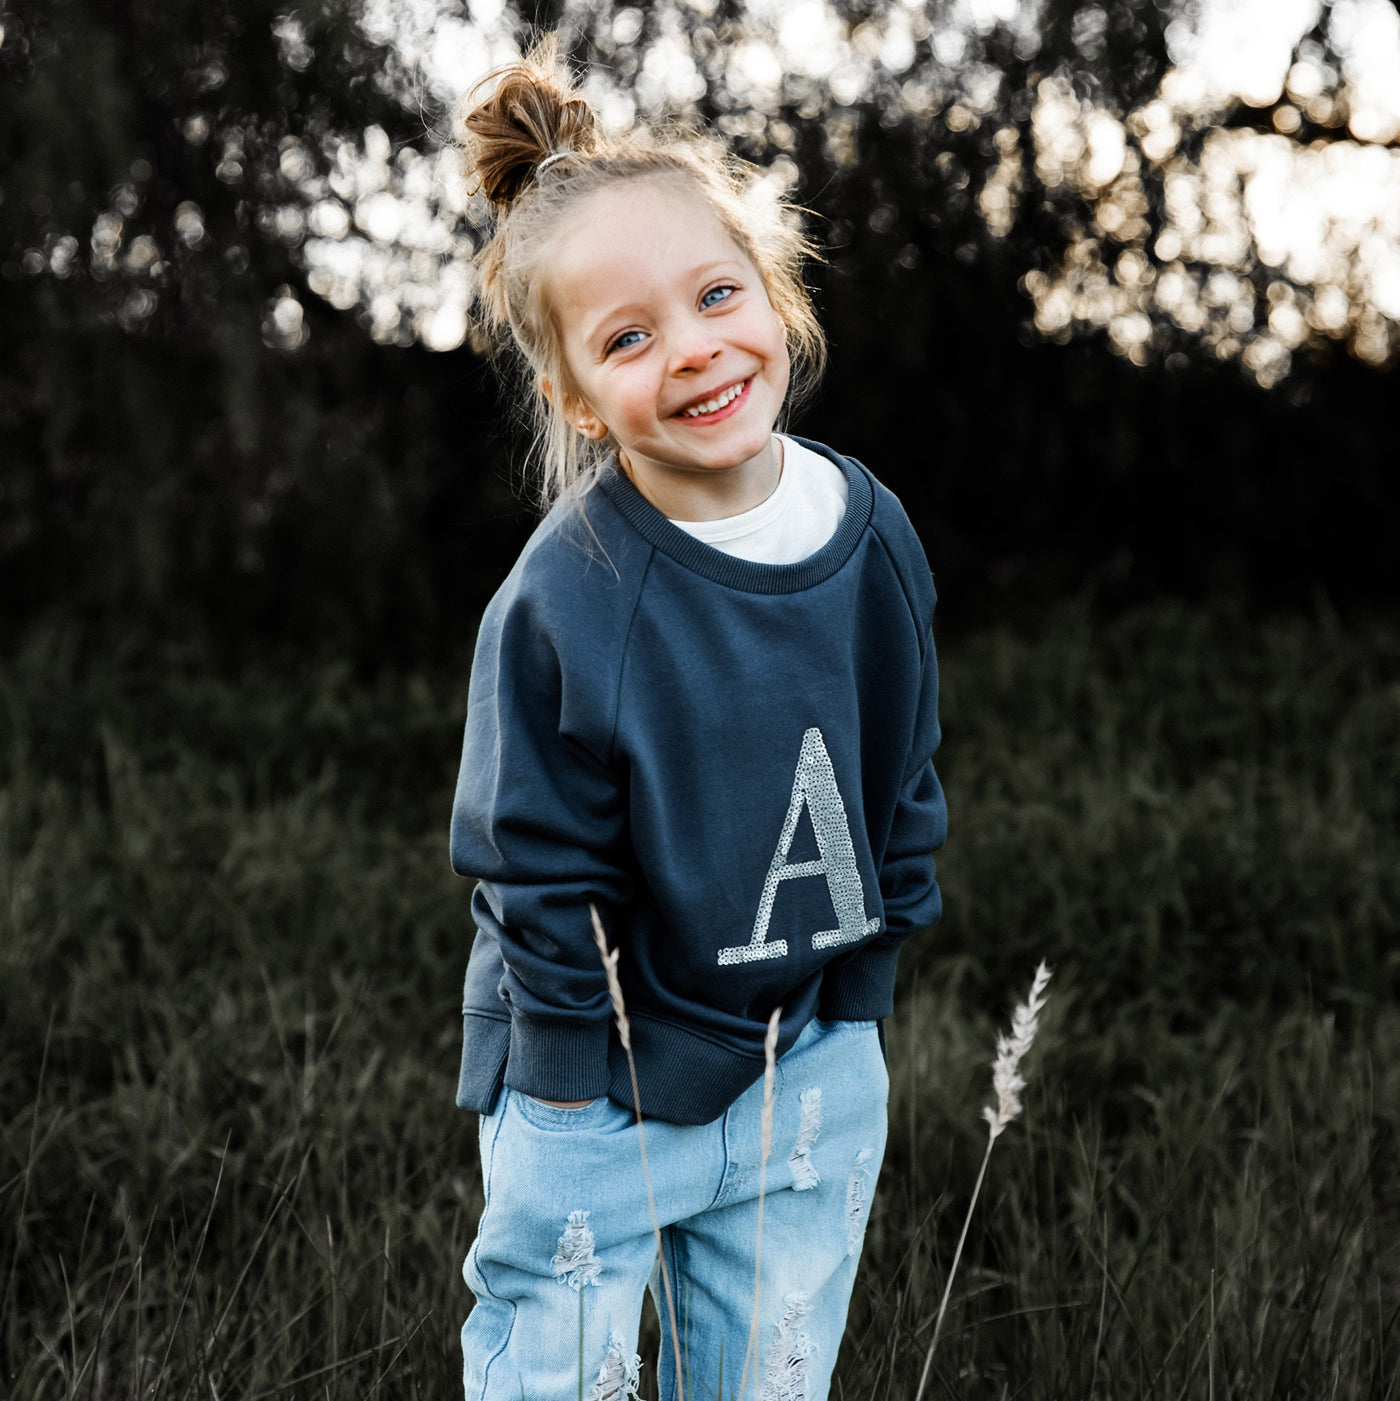 We offer kids clothes that are fun, fashionable and affordable